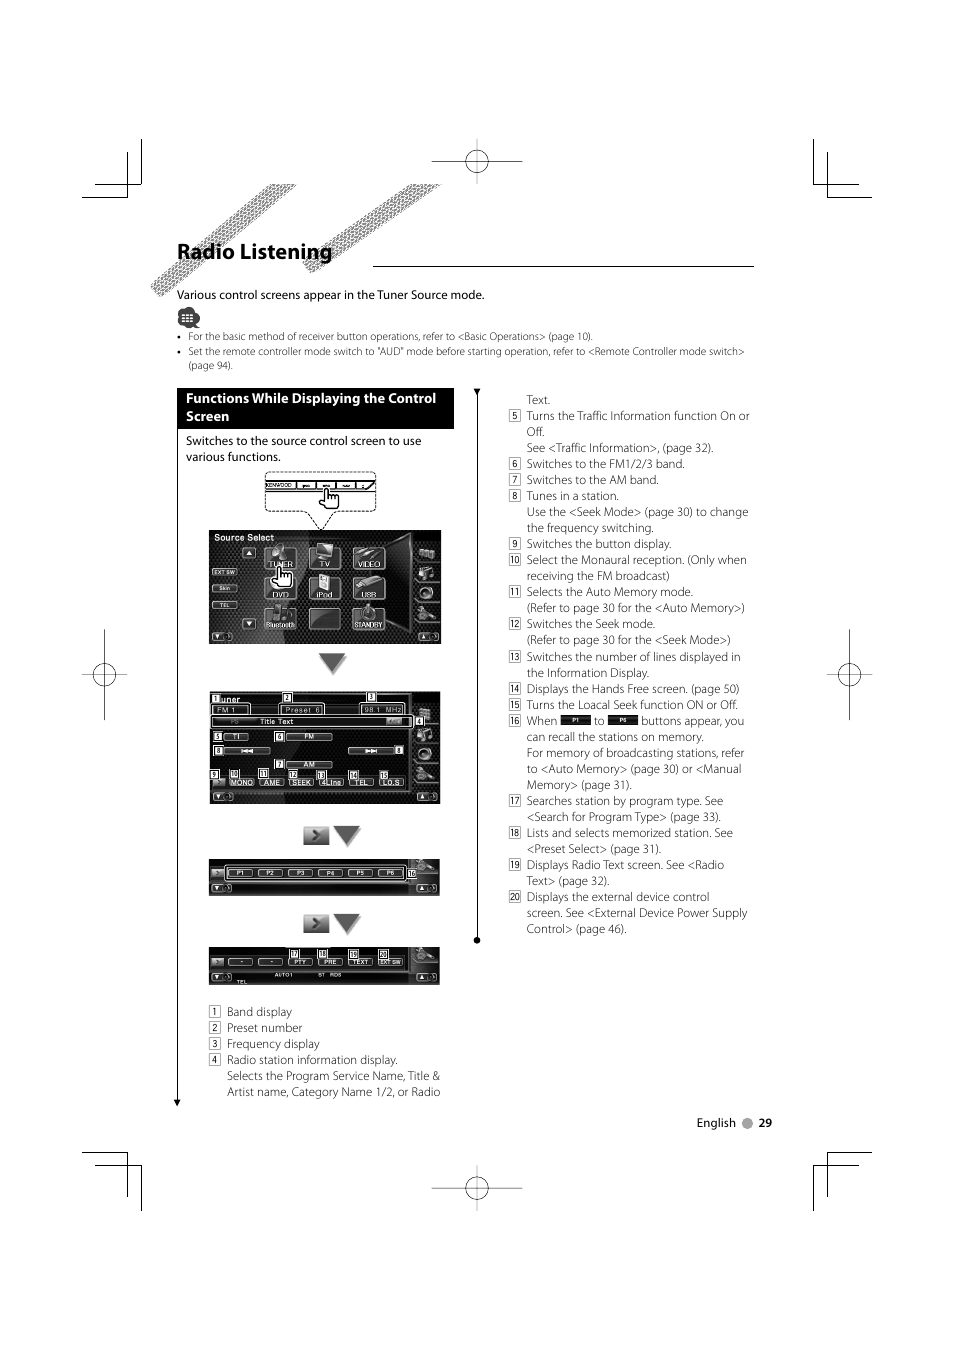 Radio listening, Functions while displaying the control screen | Kenwood DDX8022BT User Manual | Page 29 / 108